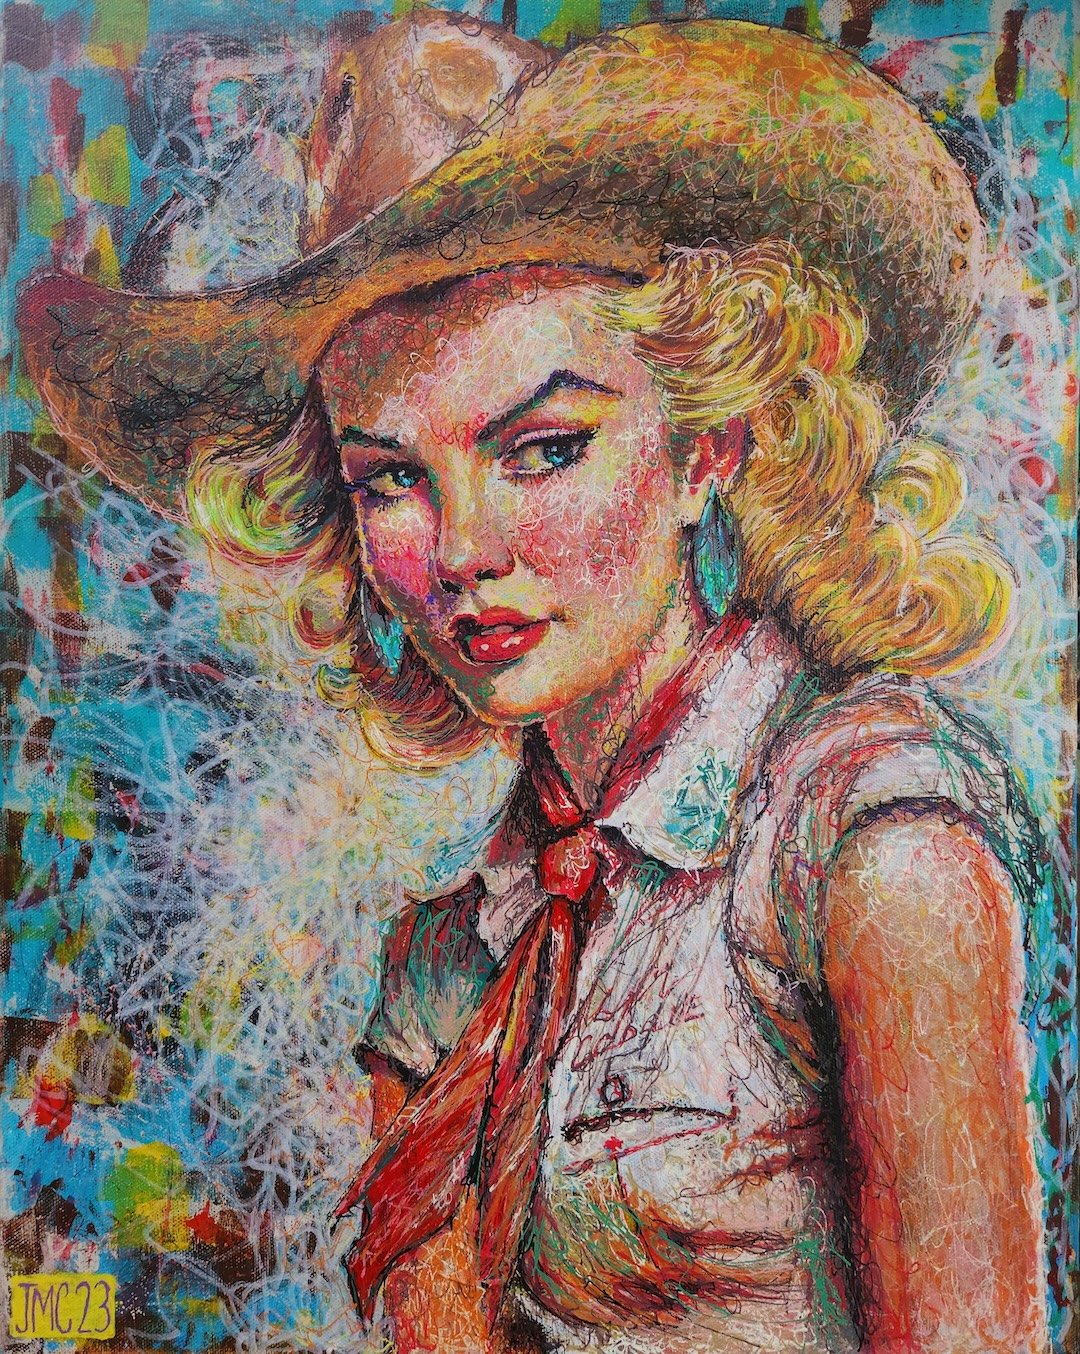    Last Rodeo  , 20” x 16”, acrylic on canvas, collaboration with Jerry Colburn 